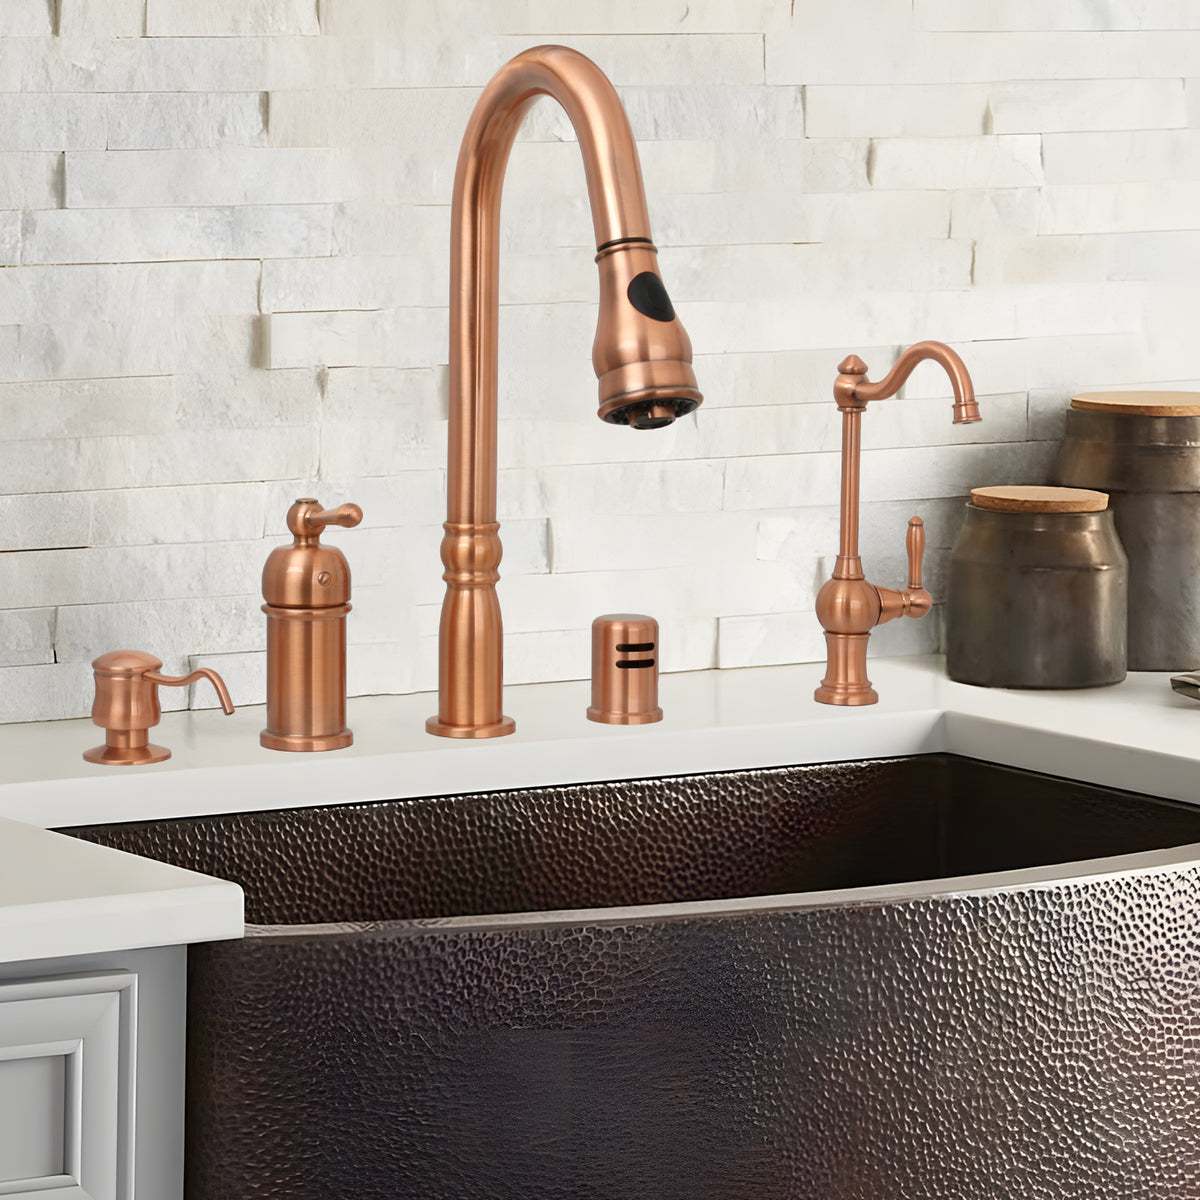 Copper Pull Out Kitchen Faucet with in-Deck Handle, Single Level Solid Brass Kitchen Sink Faucets with Pull Down Sprayer-AK97918